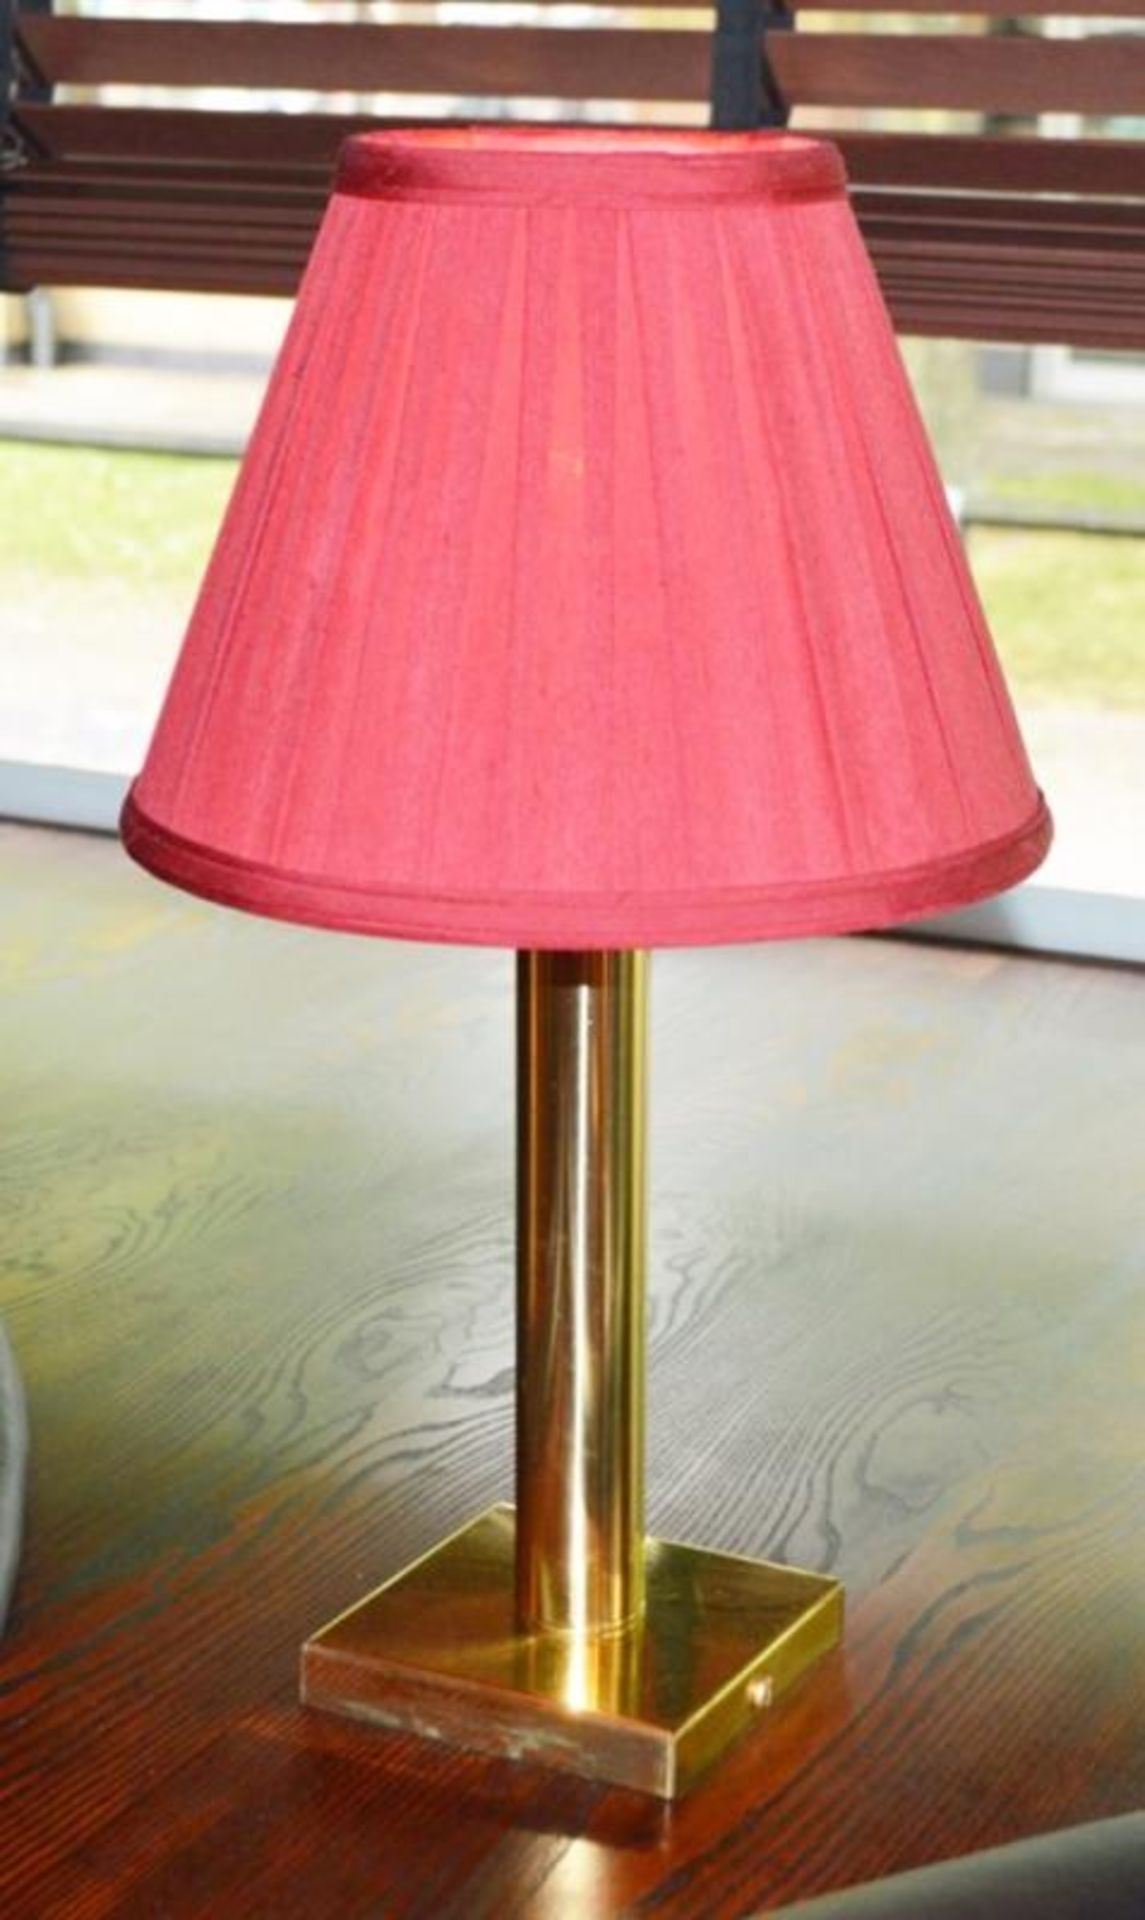 10 x Fixed Table Lamps With a Brass Finish and Red Shades -Total Height 46cms